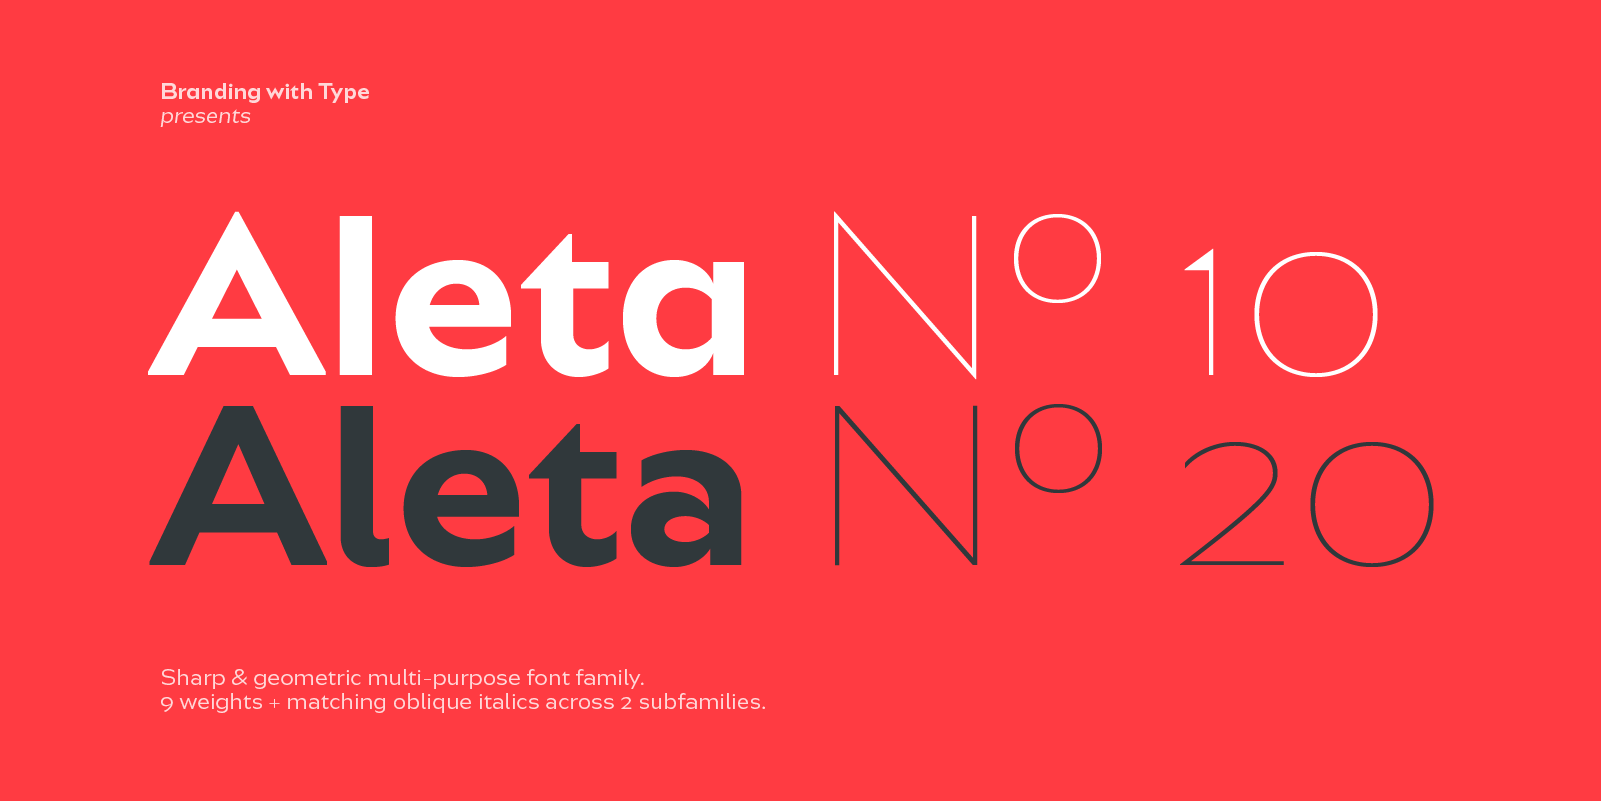 Introducing the Bw Aleta font family